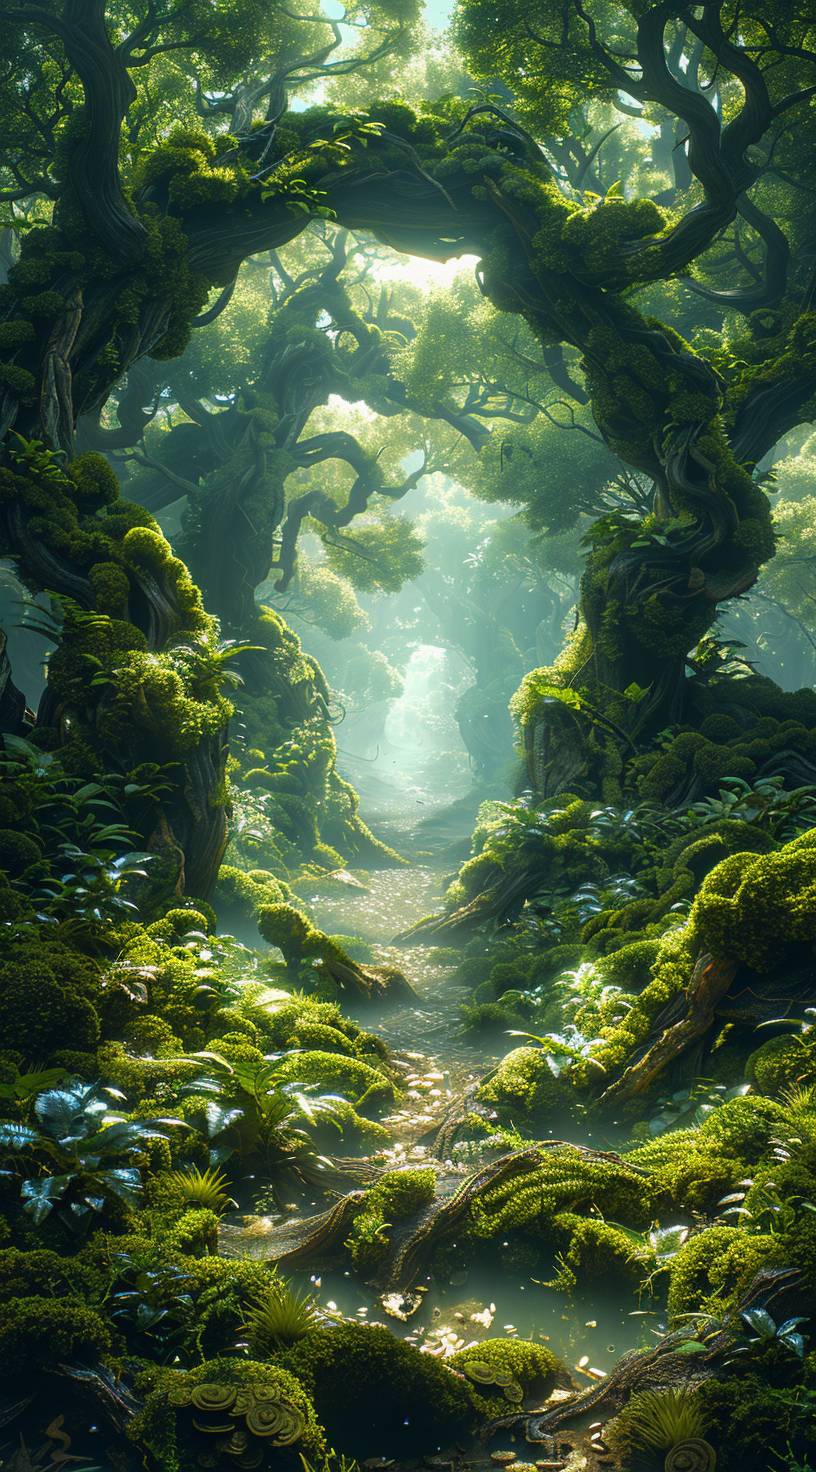 A mysterious space in a deep, humus, quiet forest with moss-covered fallen trees, bright style, adventure vibe, dust, mycelium and puddles, anime style, key visual, sky